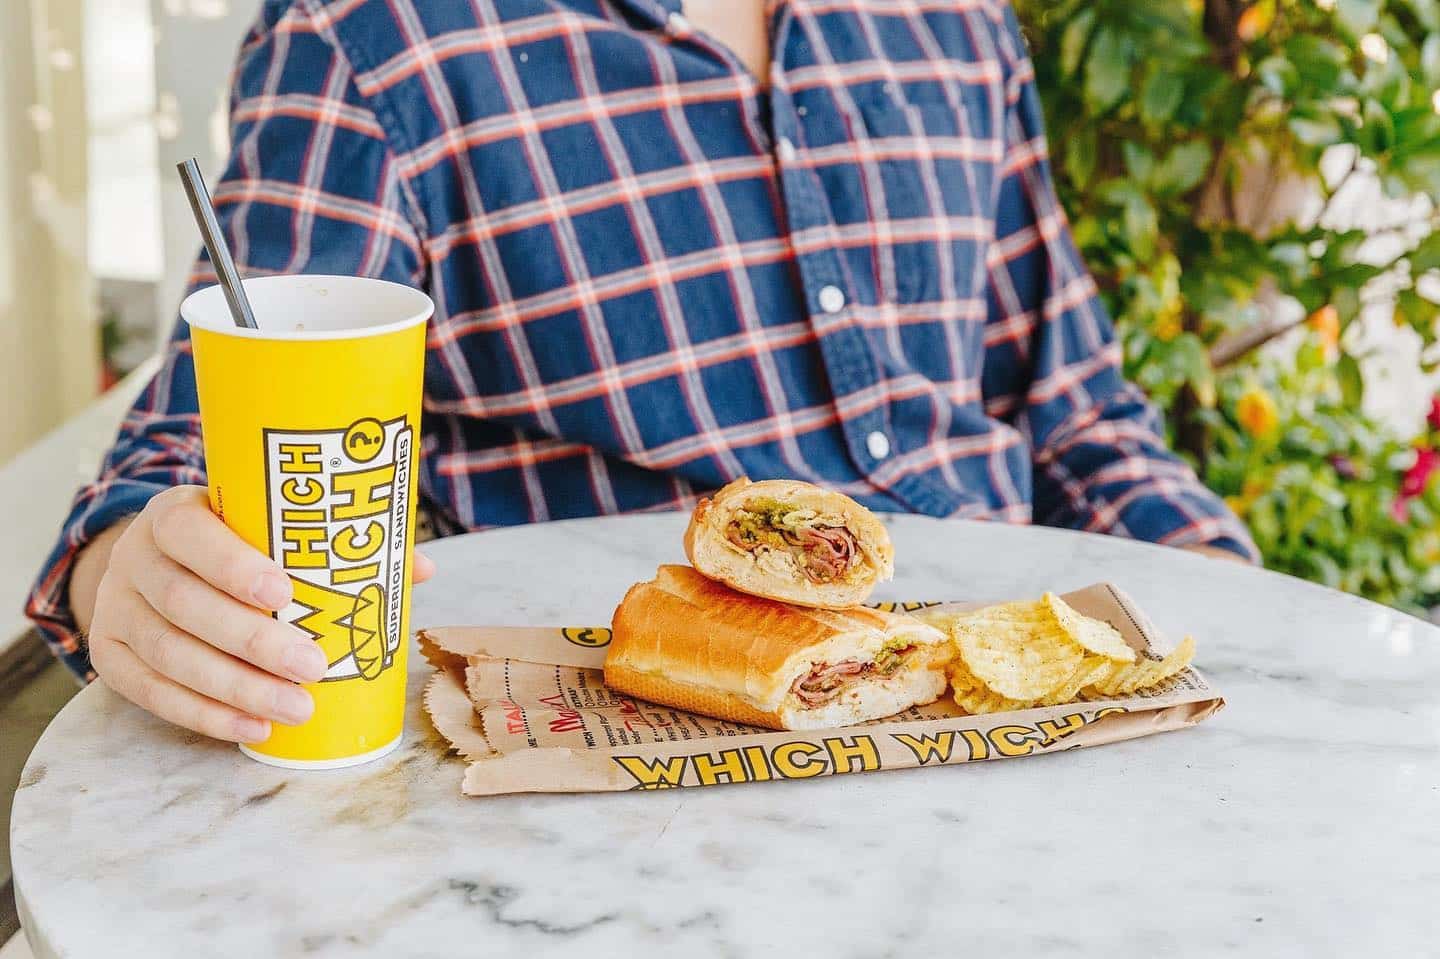 Lunch plans? We’ve got you.

🌯 @whichwich